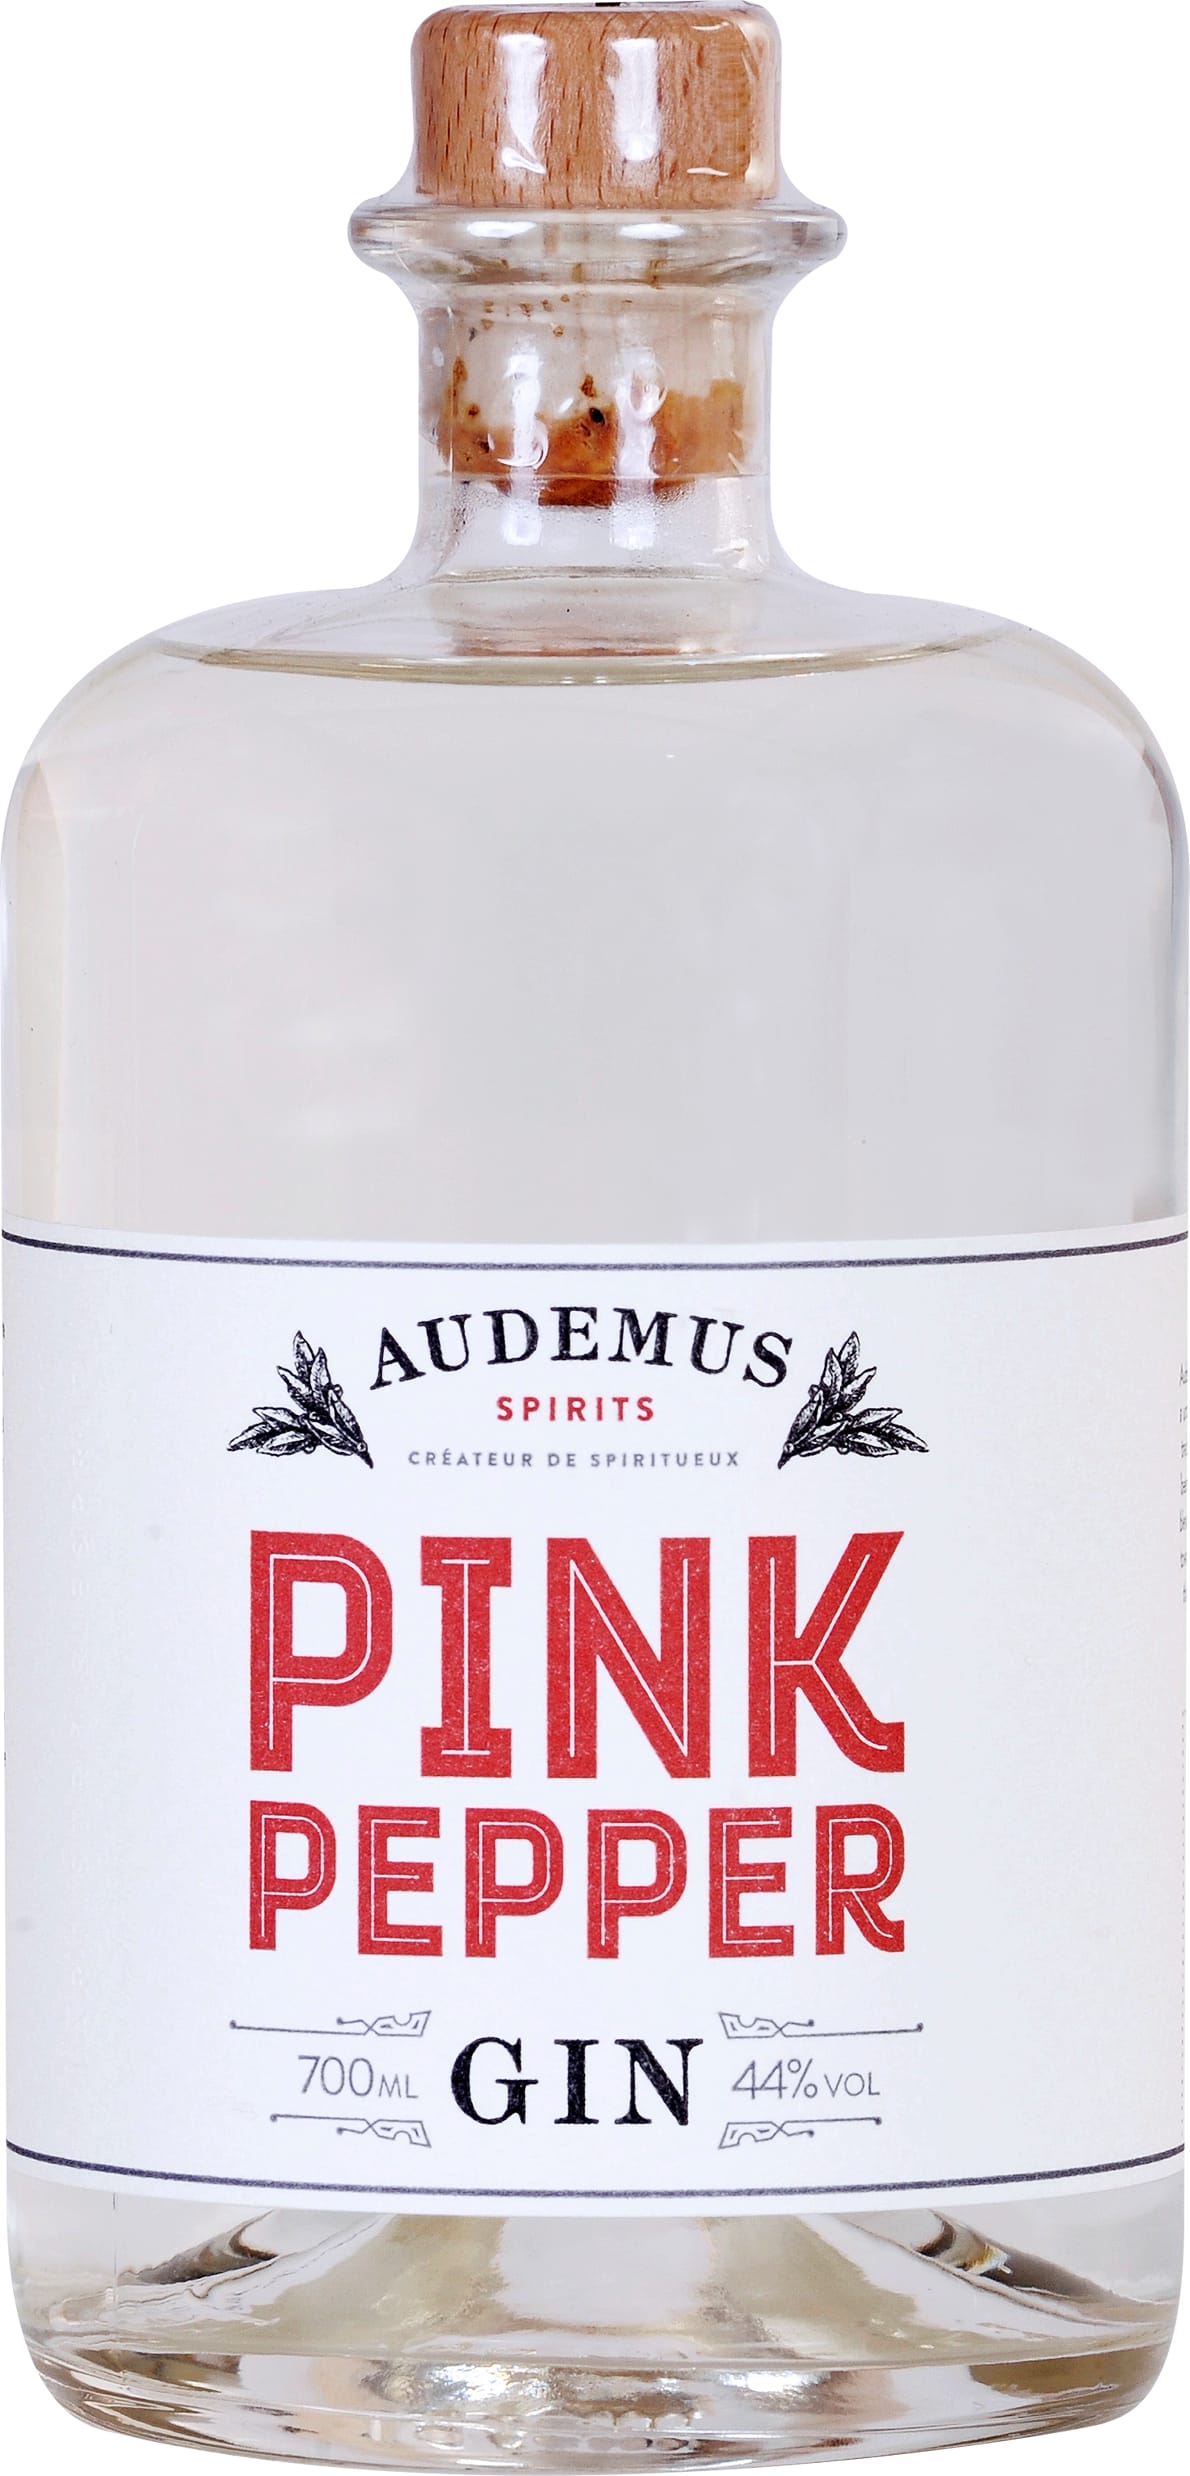 Audemus Pink Pepper Gin Original 70cl NV - Buy Audemus Wines from GREAT WINES DIRECT wine shop